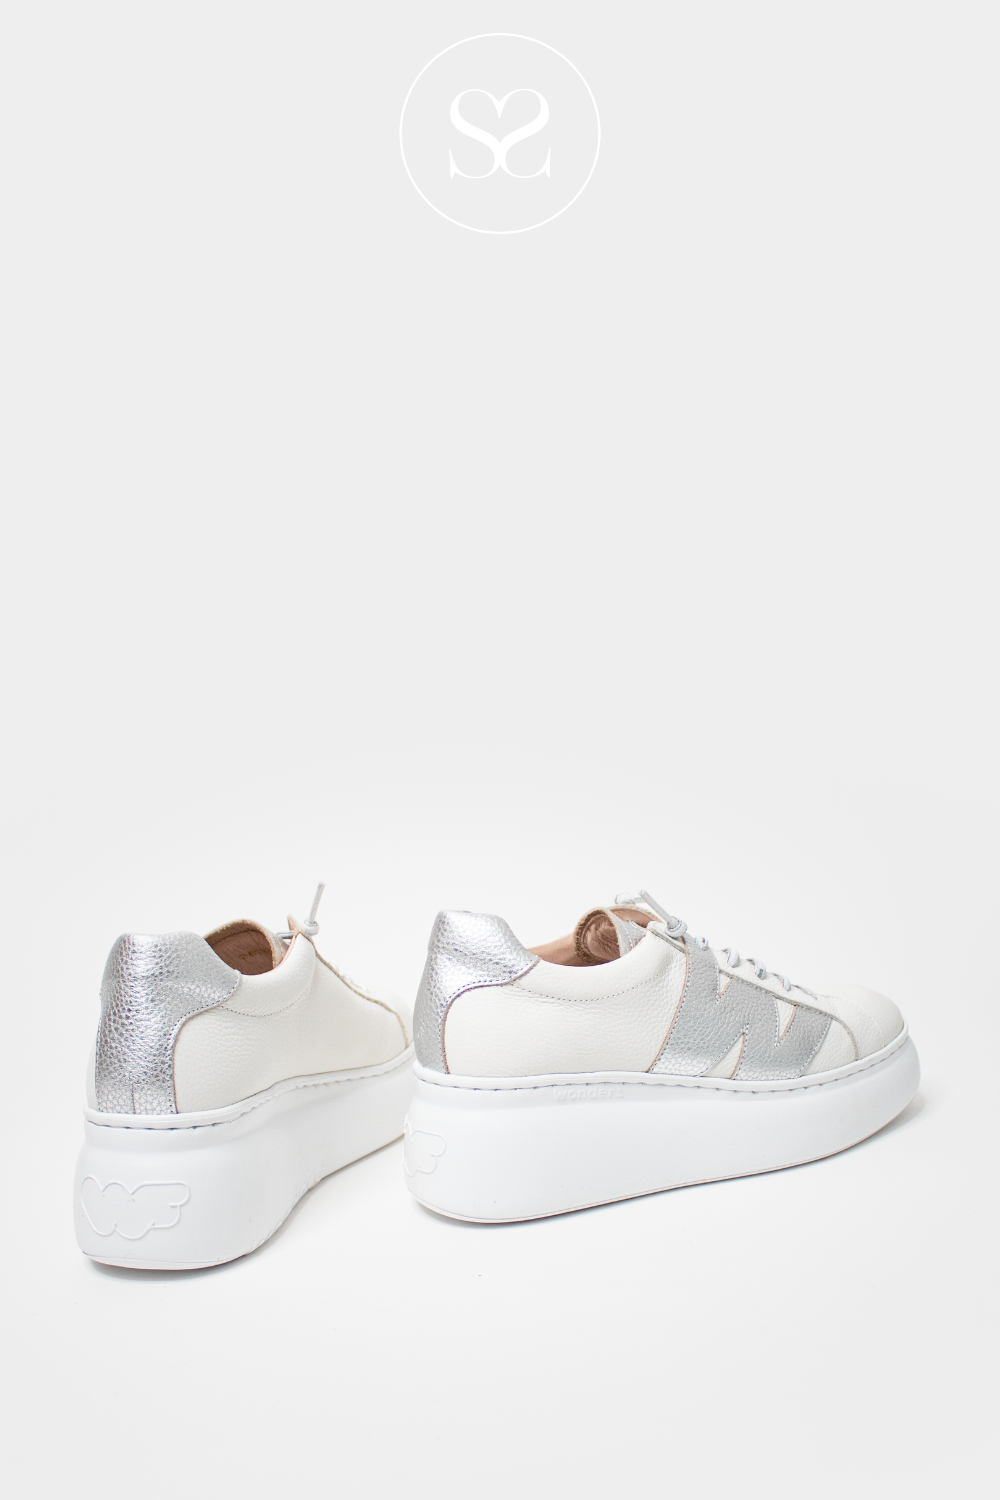 WONDERS A-2650 WHITE LEATHER PULL ON  WEDGE TRAINERS